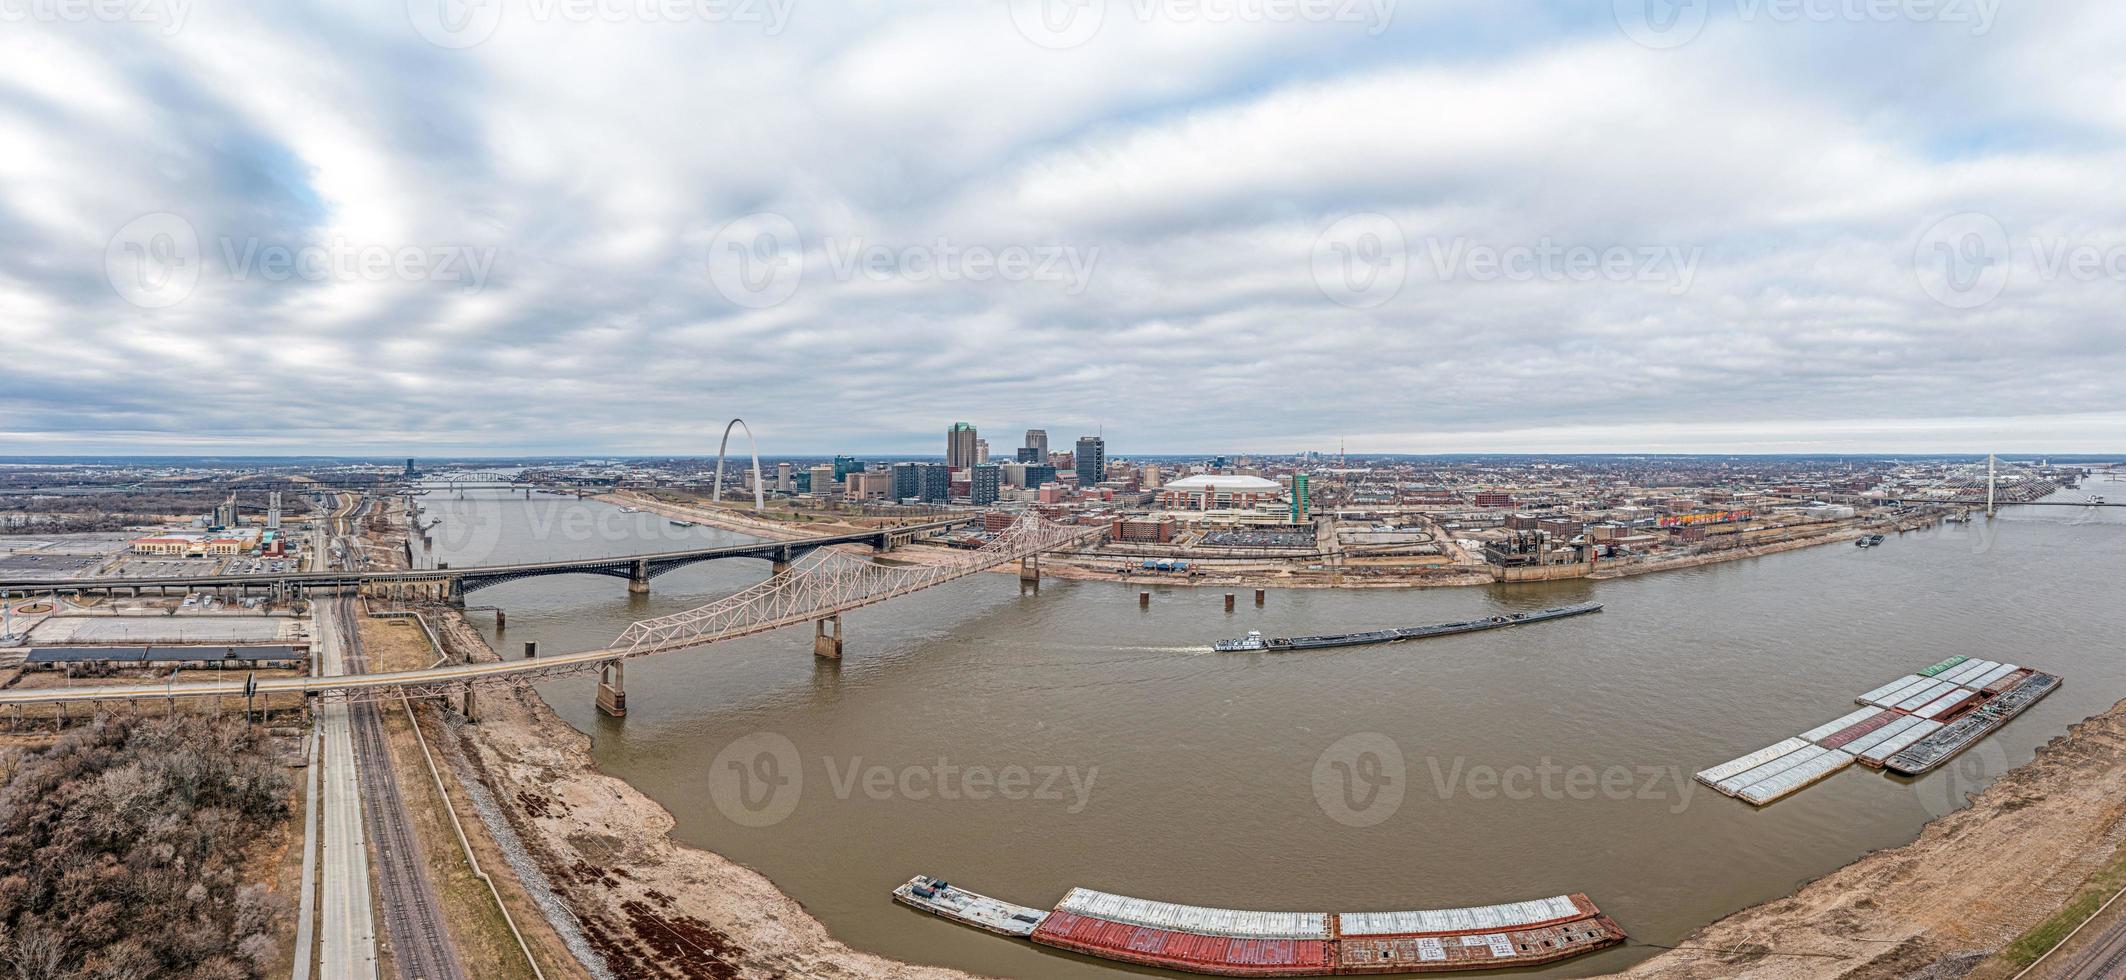 Drone panorama over St. Louis skyline and Mississippi River with Gateway Arch during daytime photo